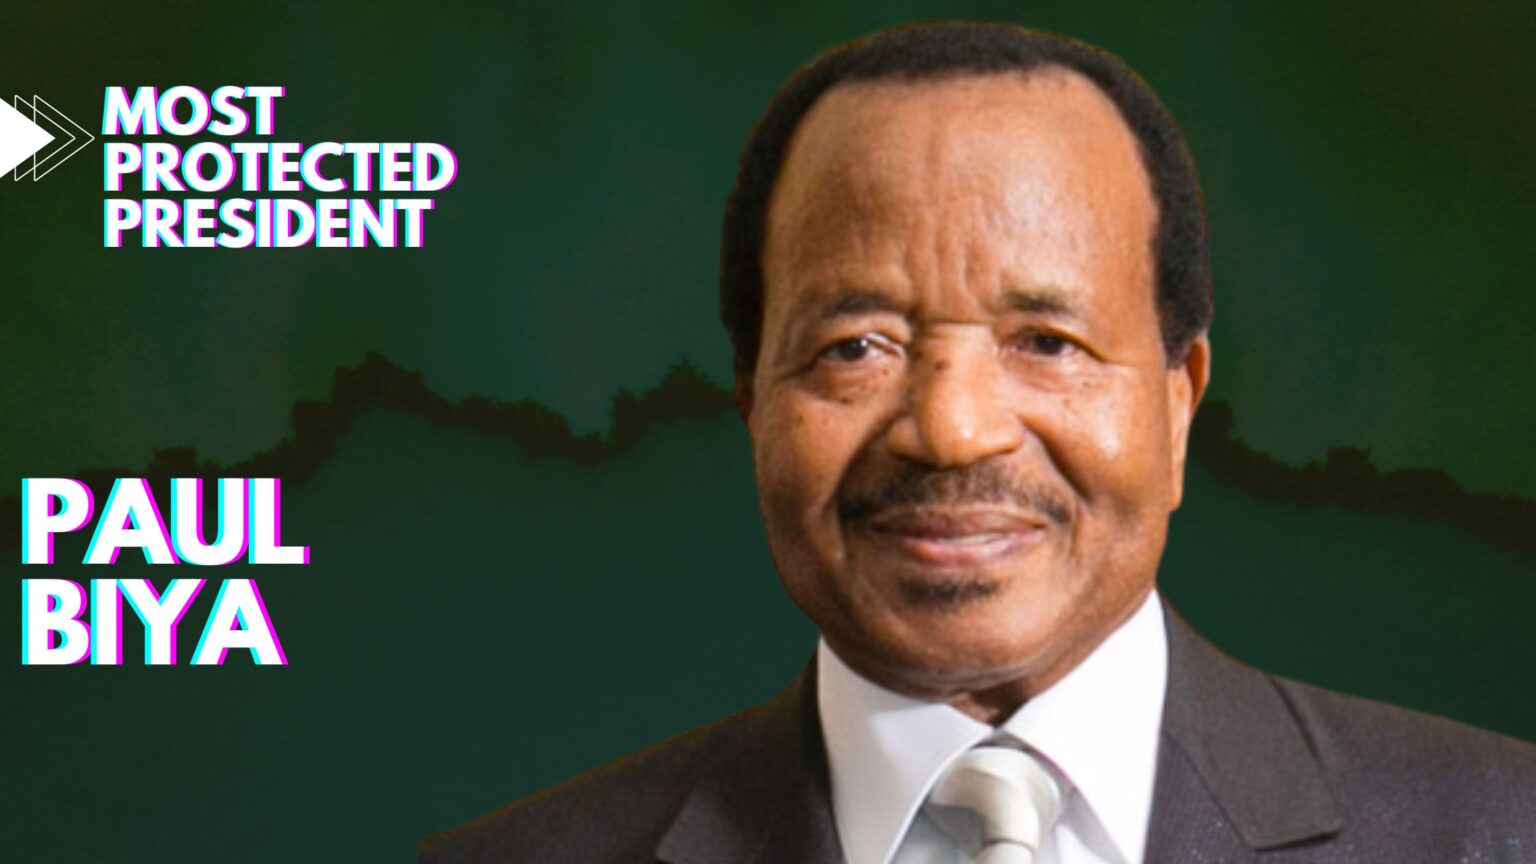 Top 10 Most Protected African Presidents